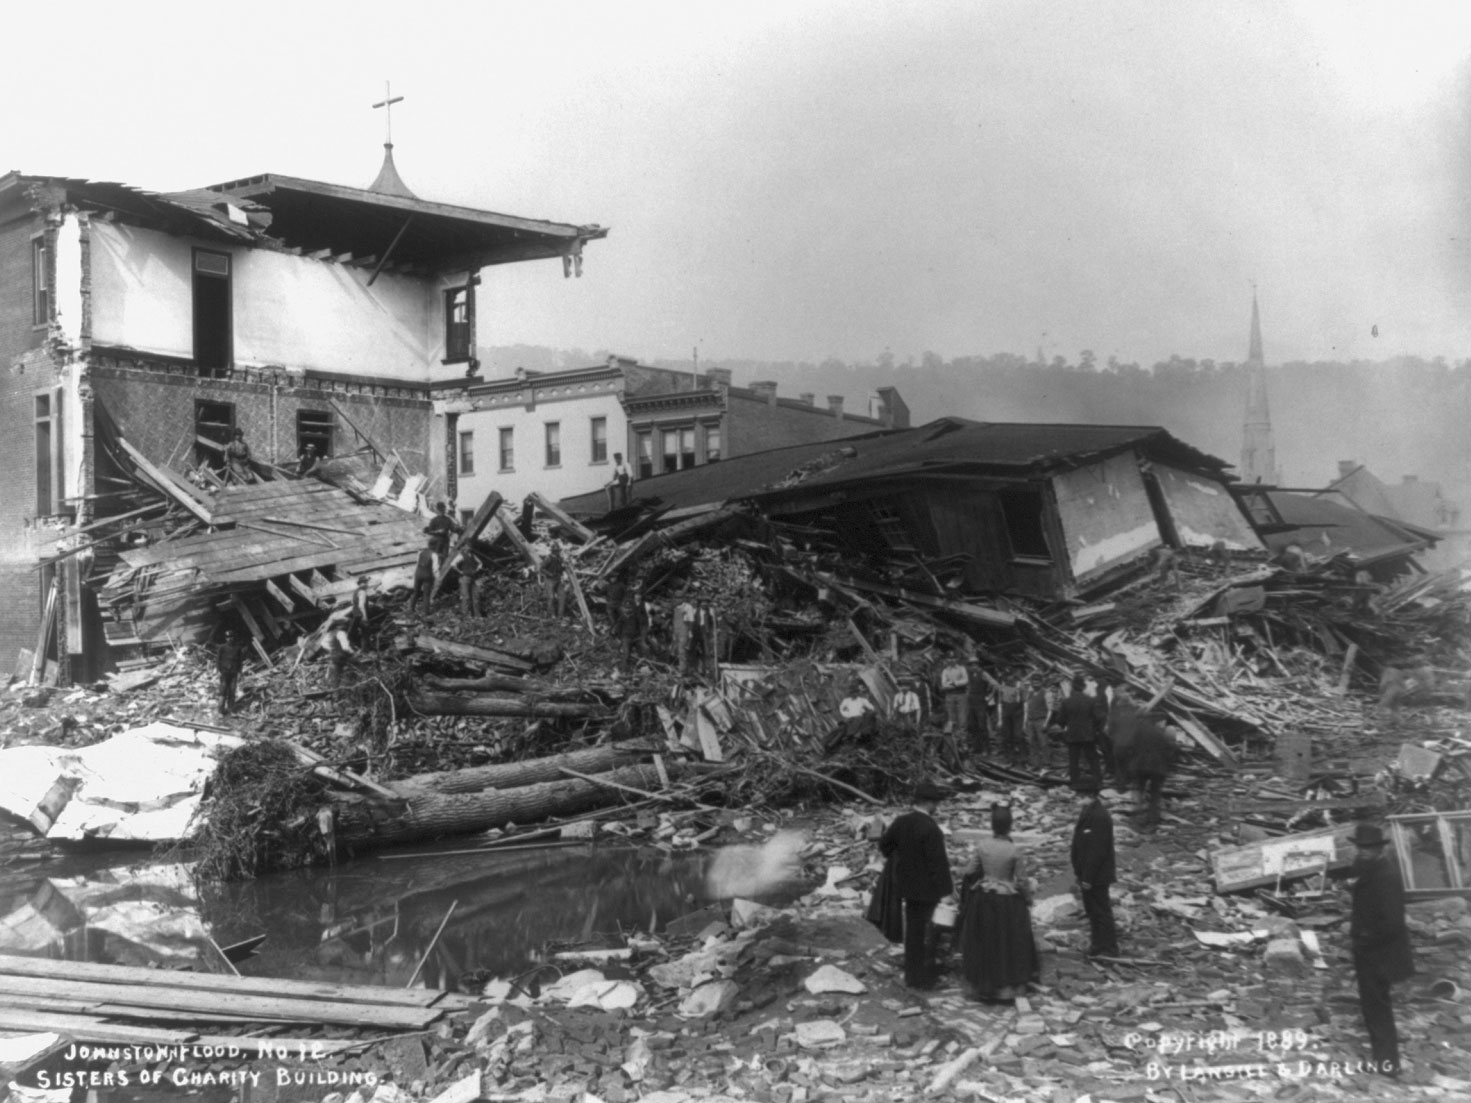 Black and white photograph showing the aftermath of the 1899 Johnstown Flood in Pennsylvania. The photo shows a collapsed building and debris, including a large uprooted tree. People and stand in the foreground looking at the wreckage, and some stand further back on the debris itself.